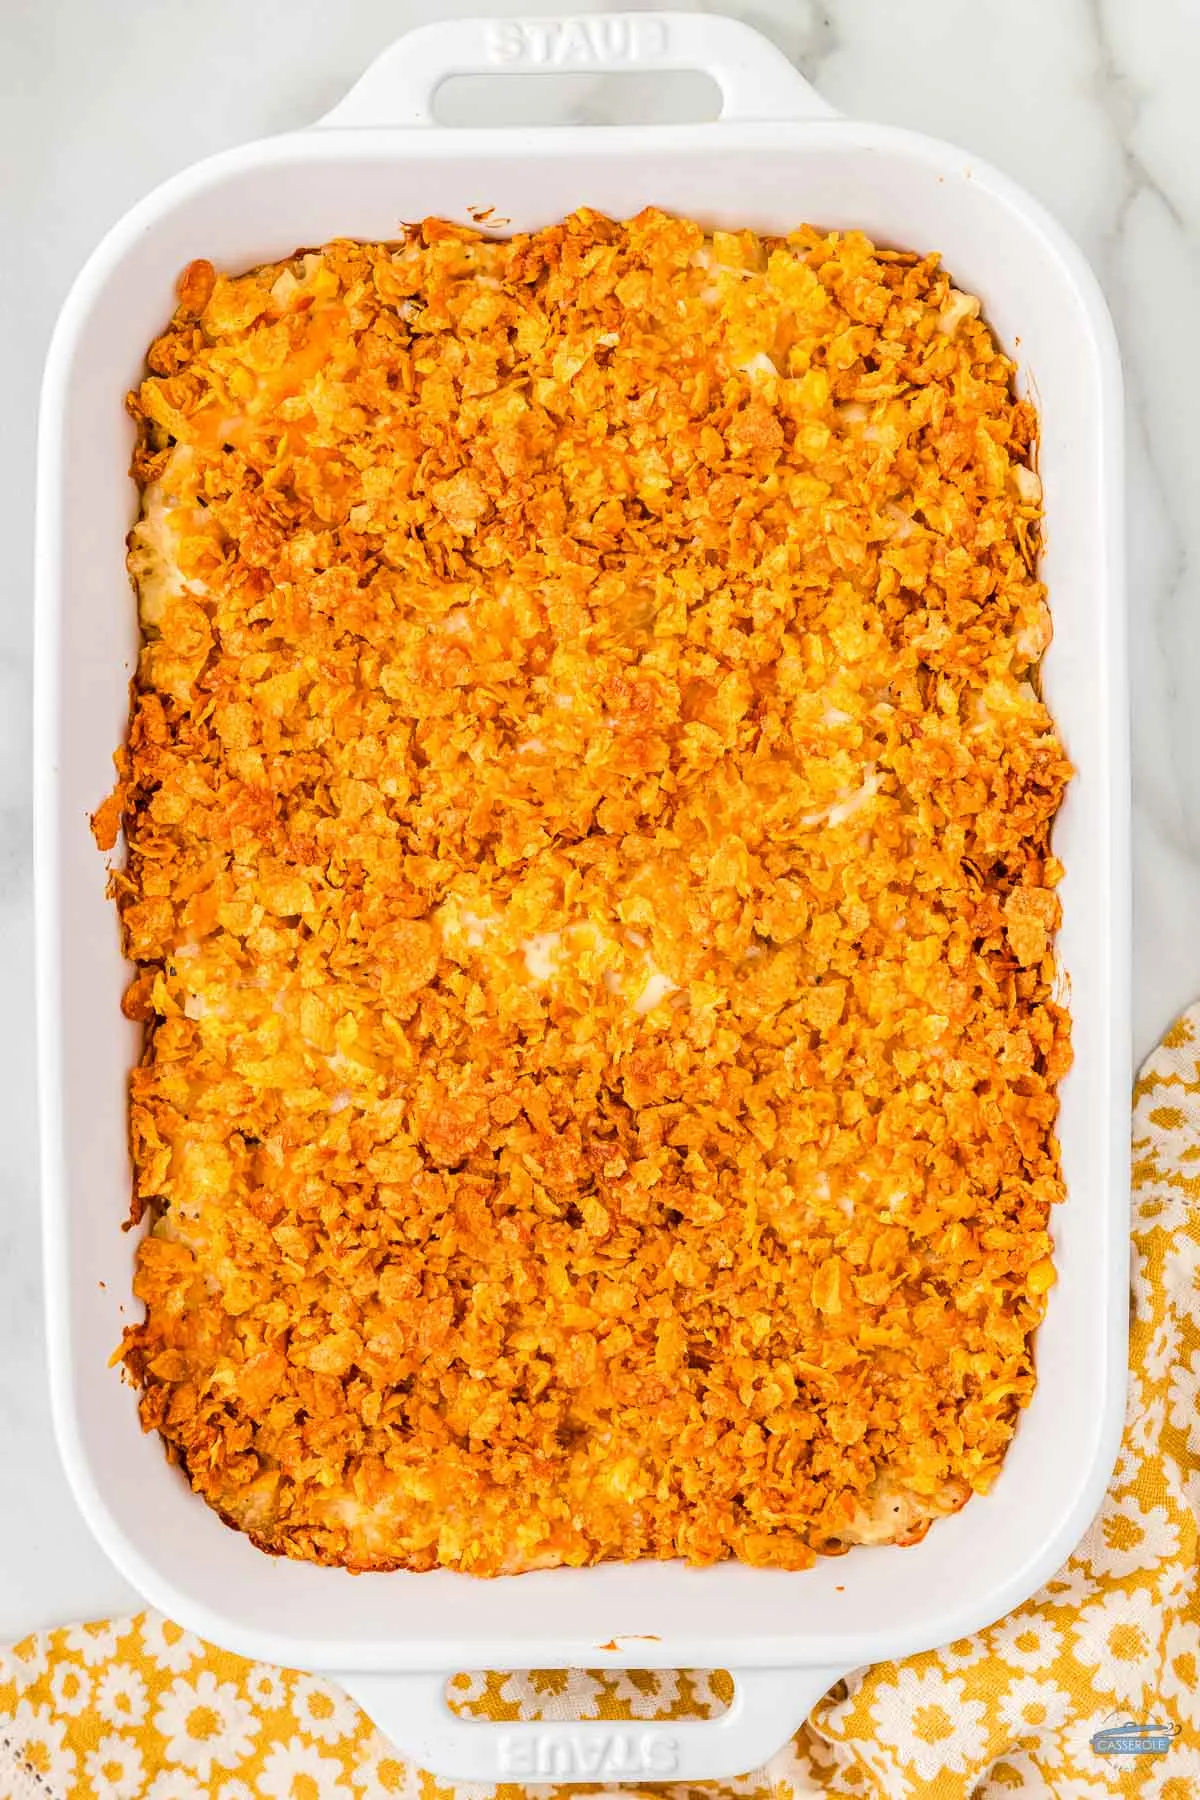 chicken hashbrown casserole is the perfect recipe for the entire family